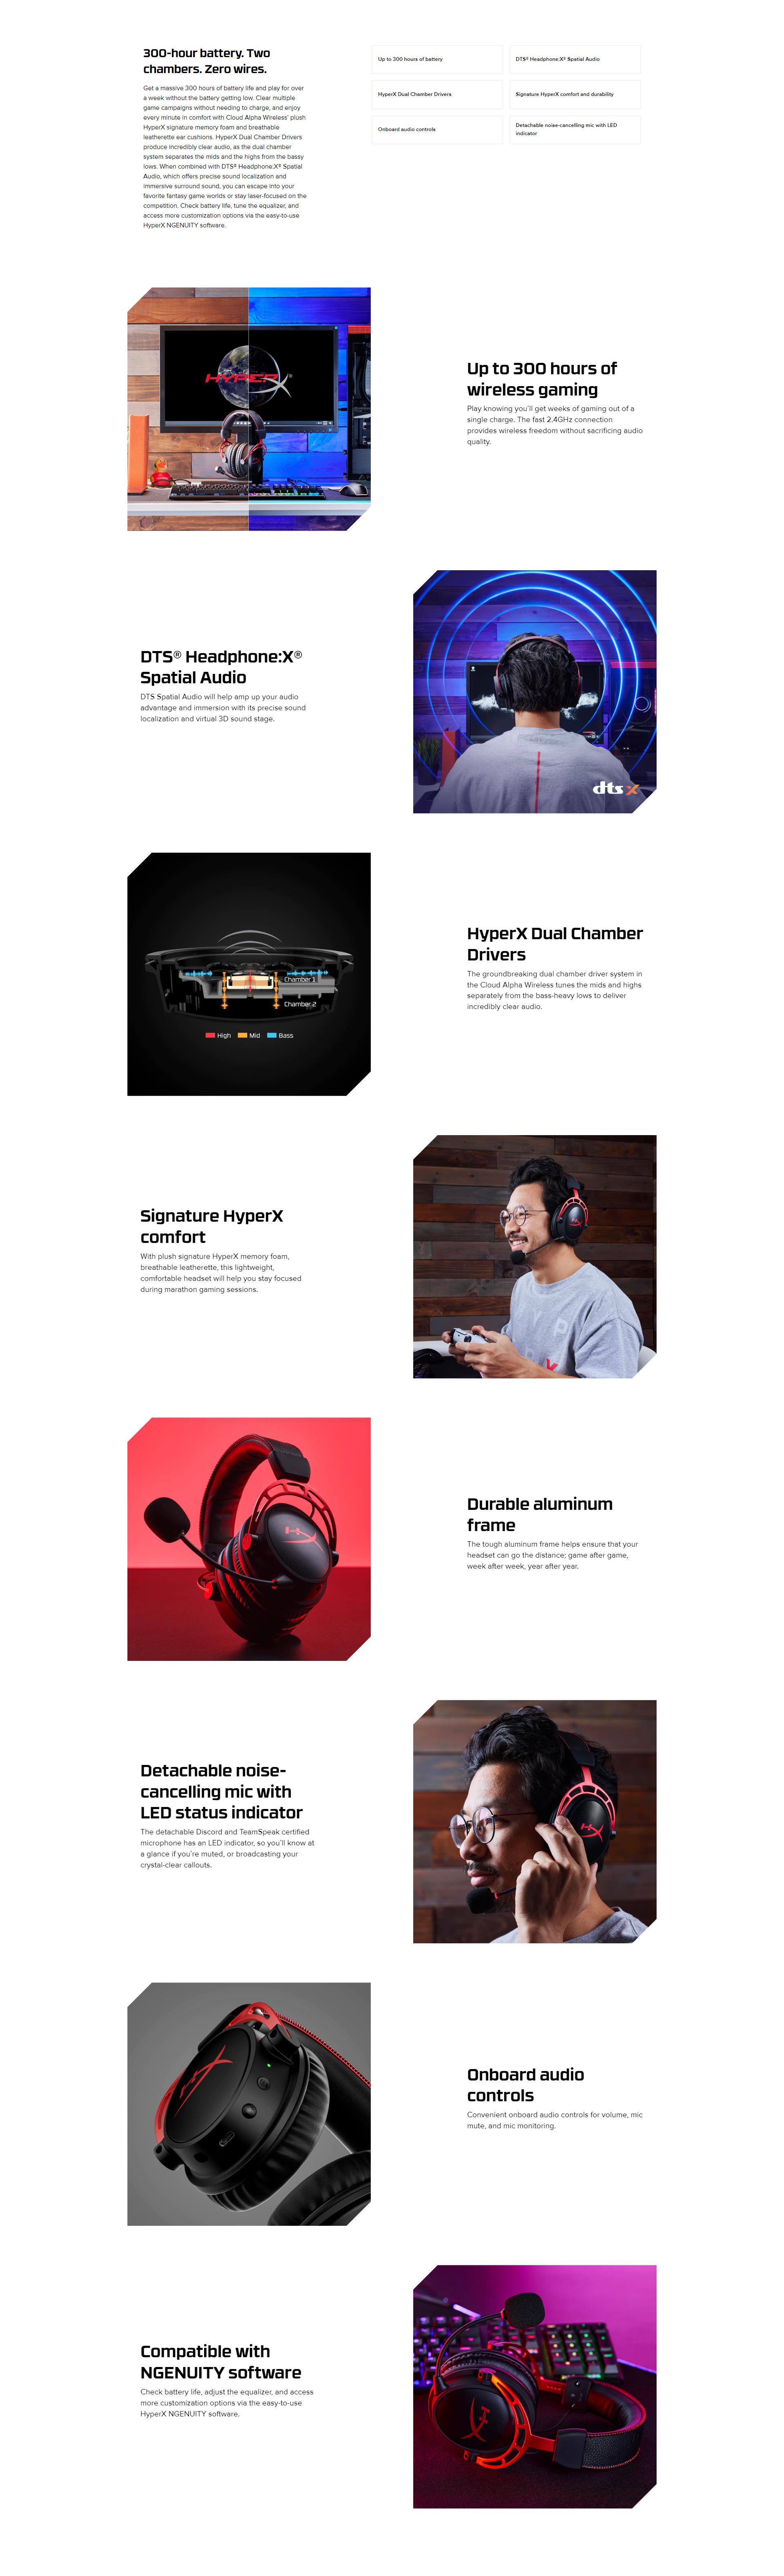 A large marketing image providing additional information about the product HyperX Cloud Alpha Wireless Gaming Headset Black/Red - Additional alt info not provided